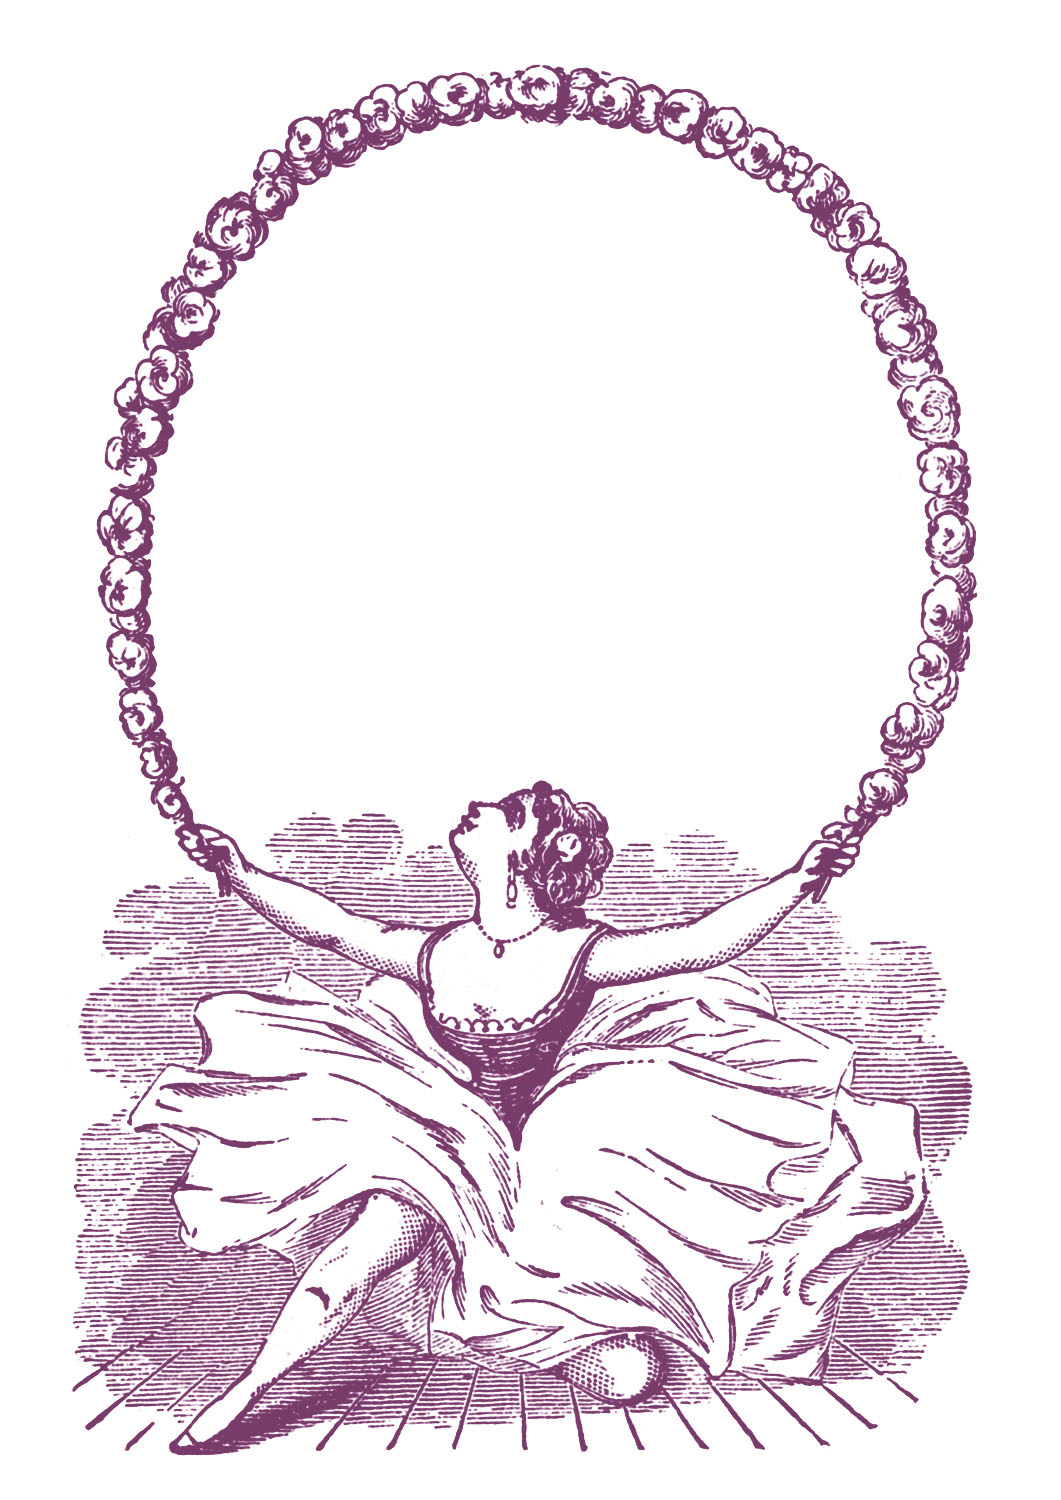 Vintage Clip Art Ballerina with Garland Graphic Frame The Graphics Fairy